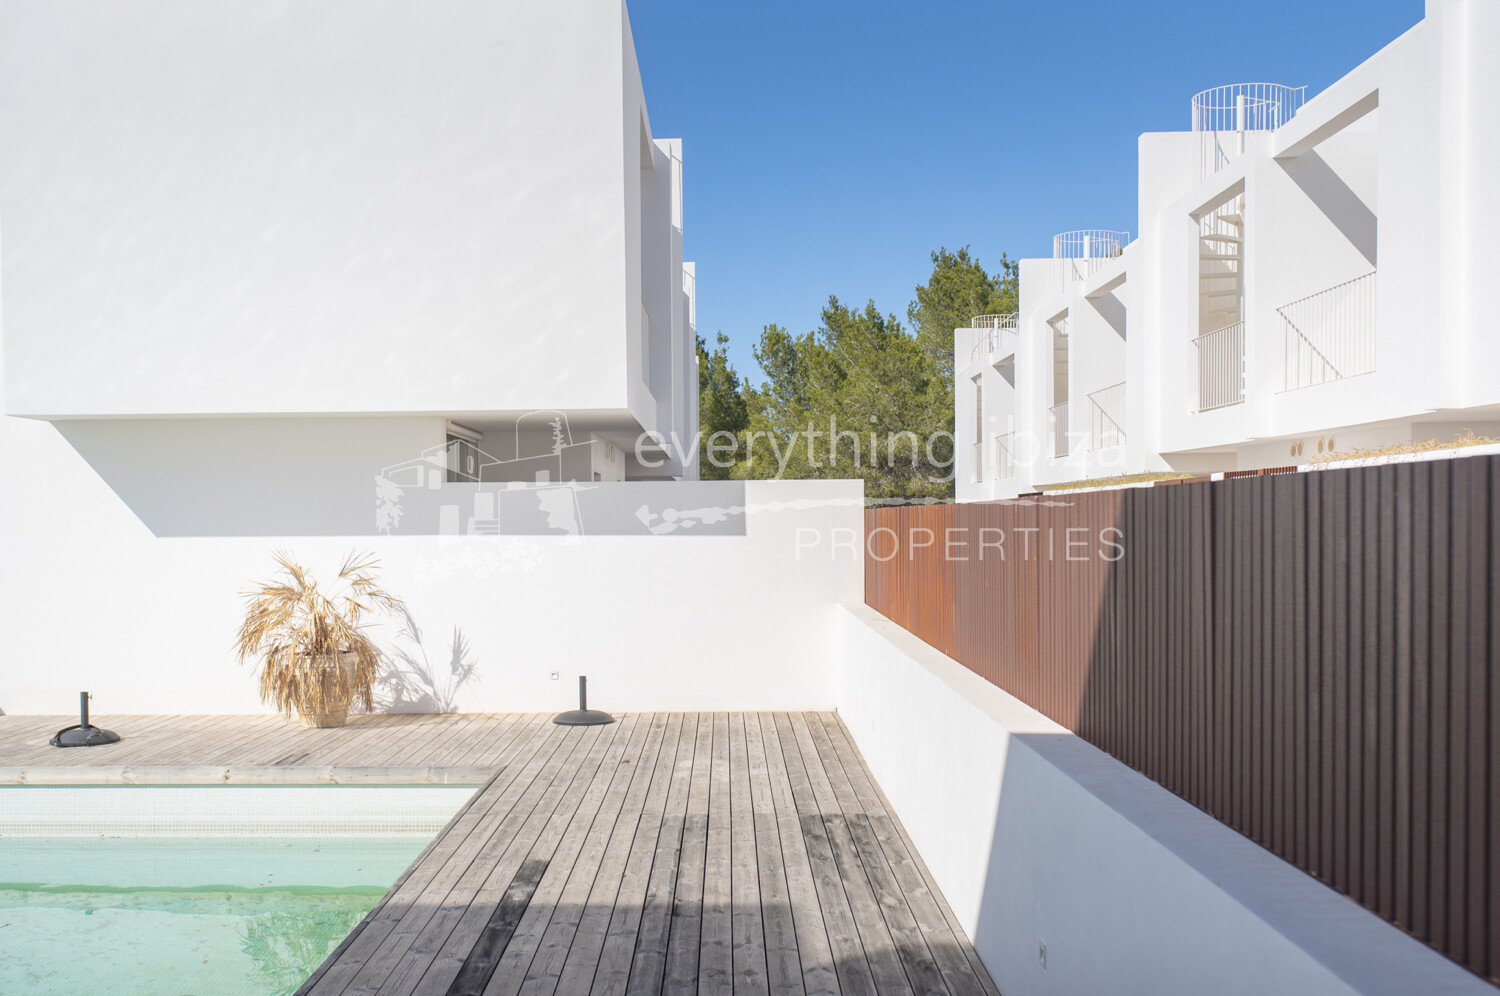 New Modern Quality Townhouses Close to Local Amenities & Beach, ref. 1717, for sale in Ibiza by everything ibiza Properties